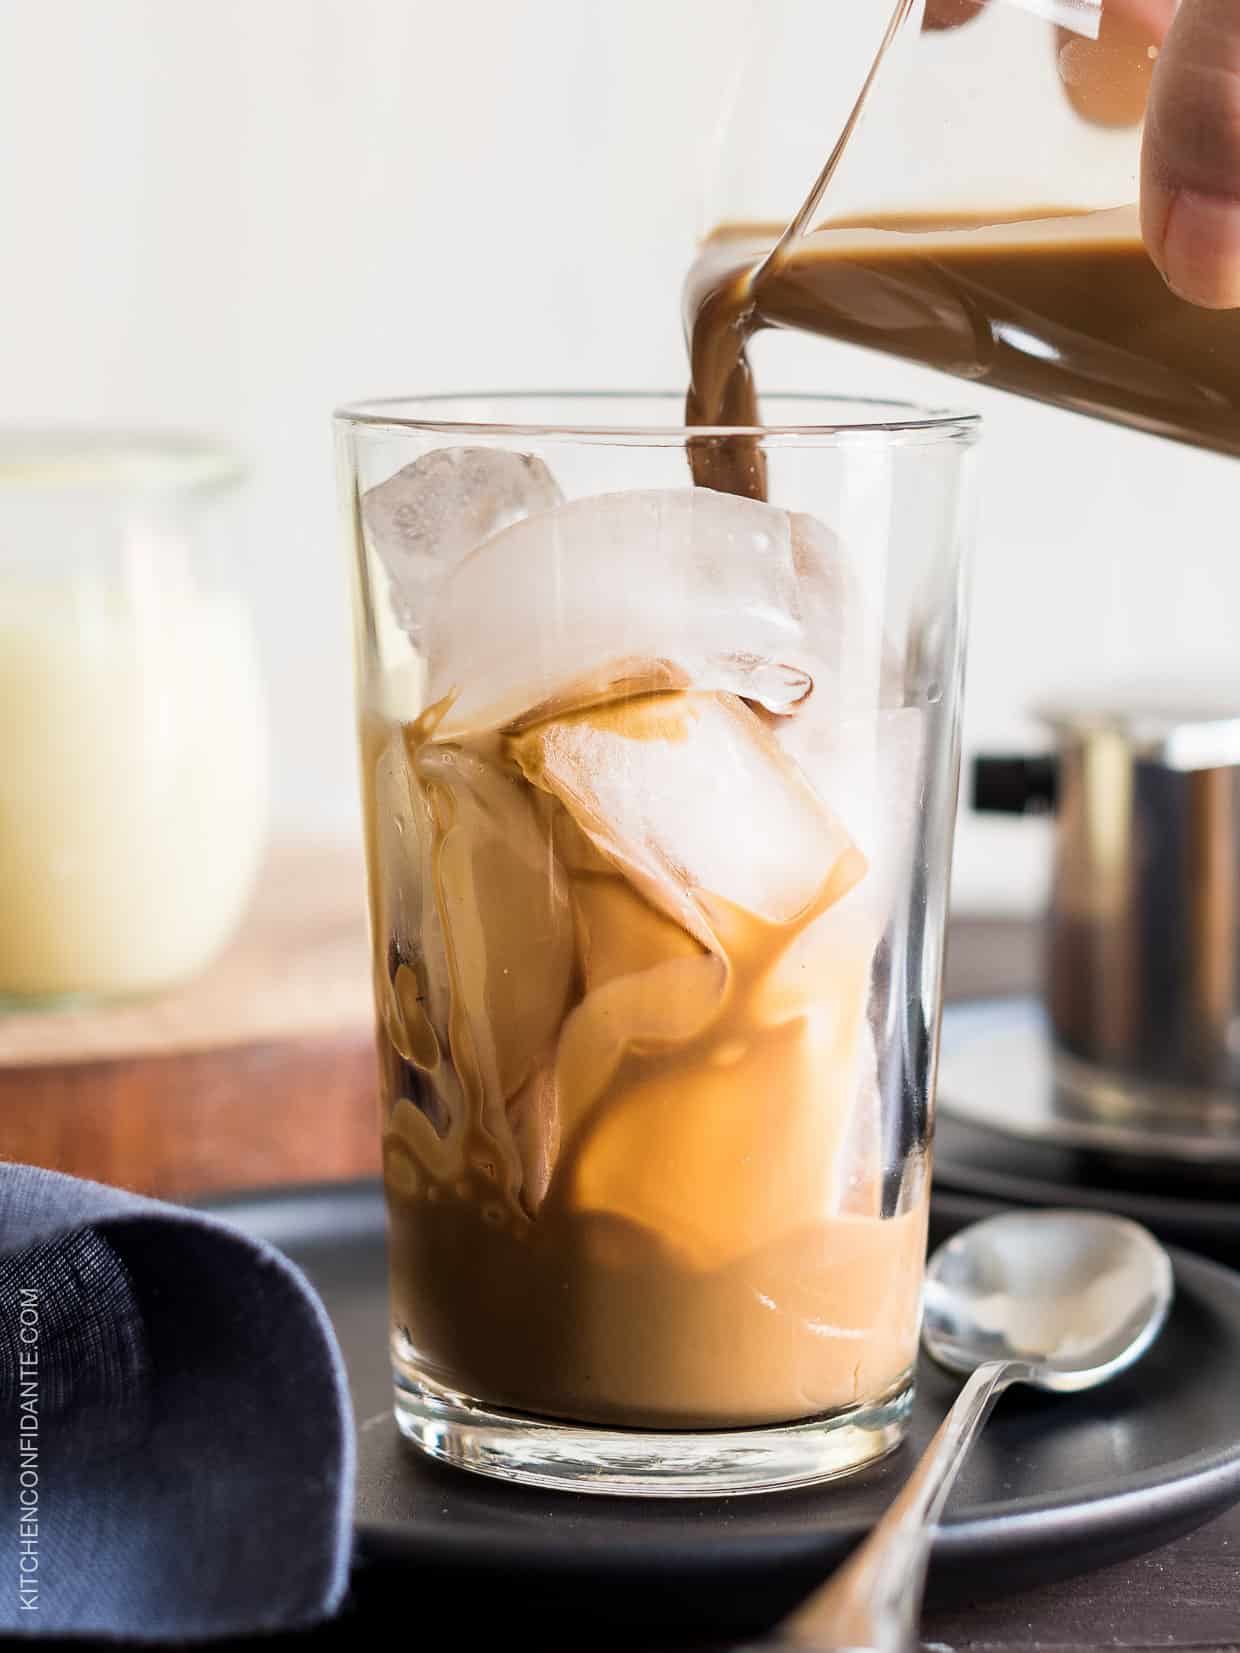 Don't wait till summer. Vietnamese Iced Coffee is a tradition you'll want for every day.